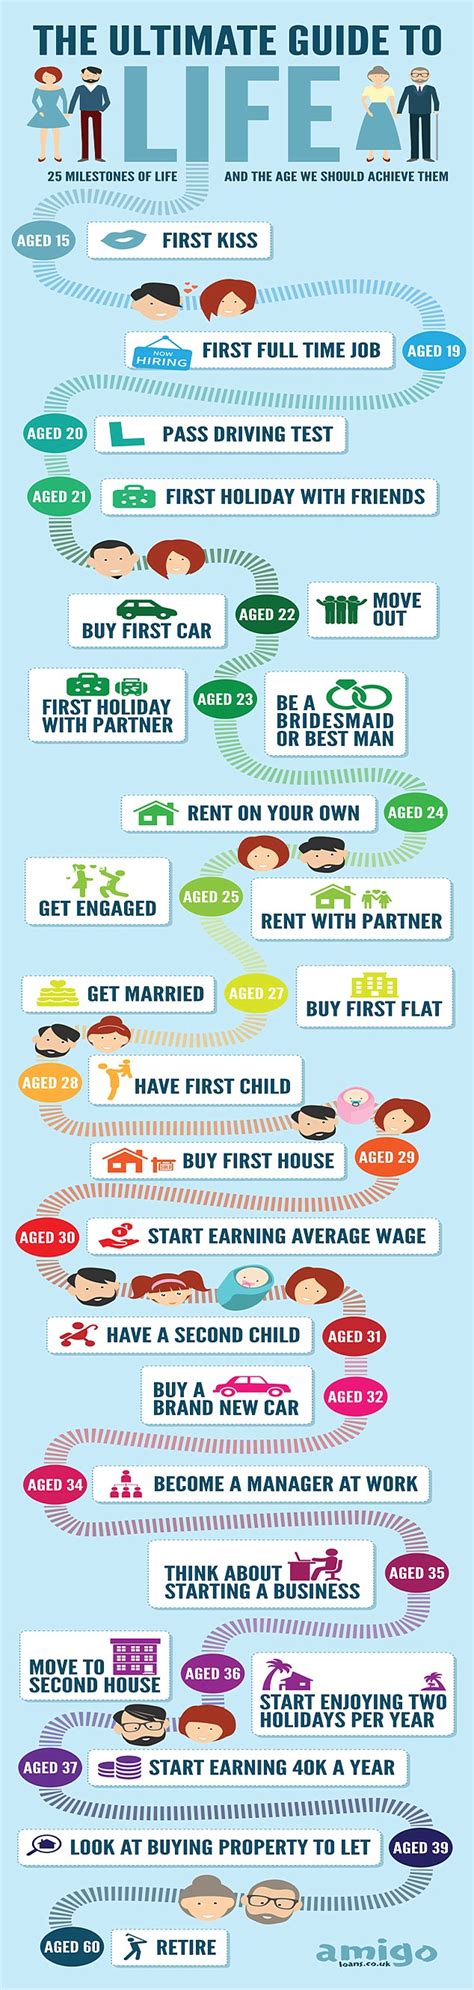 Marriage At 27 First House At 29 And Earning £40000 A Year By 37 Are